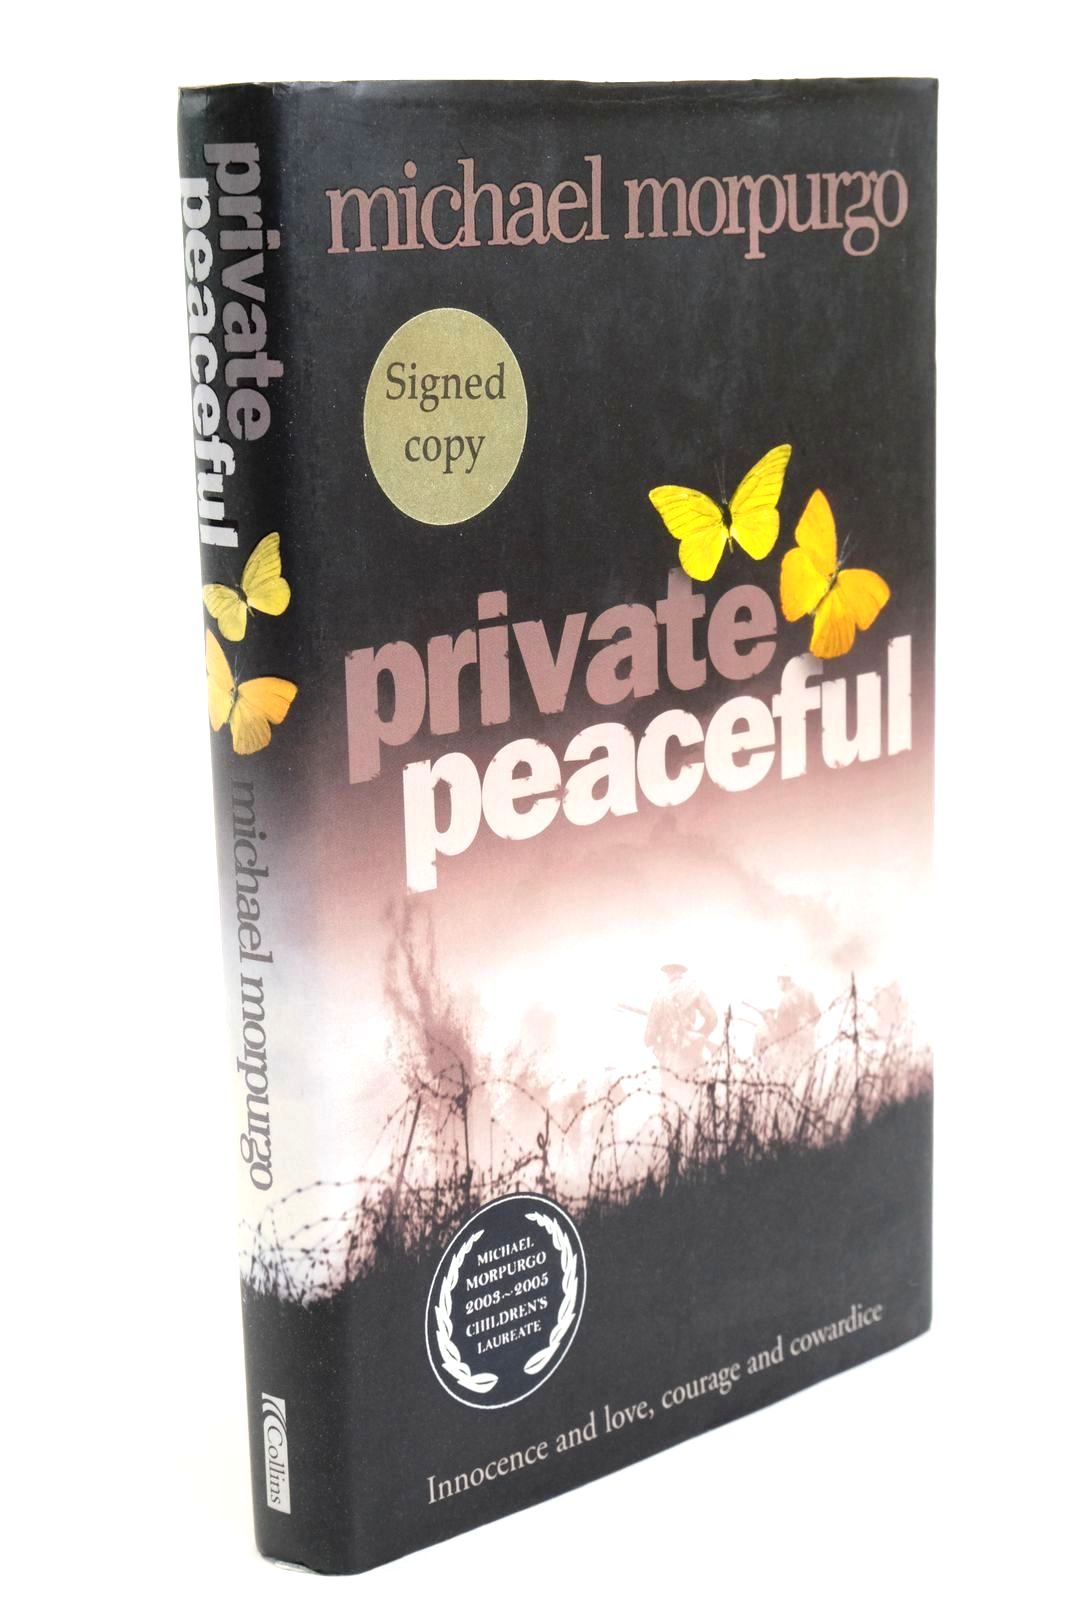 Photo of PRIVATE PEACEFUL written by Morpurgo, Michael published by Collins (STOCK CODE: 1322163)  for sale by Stella & Rose's Books